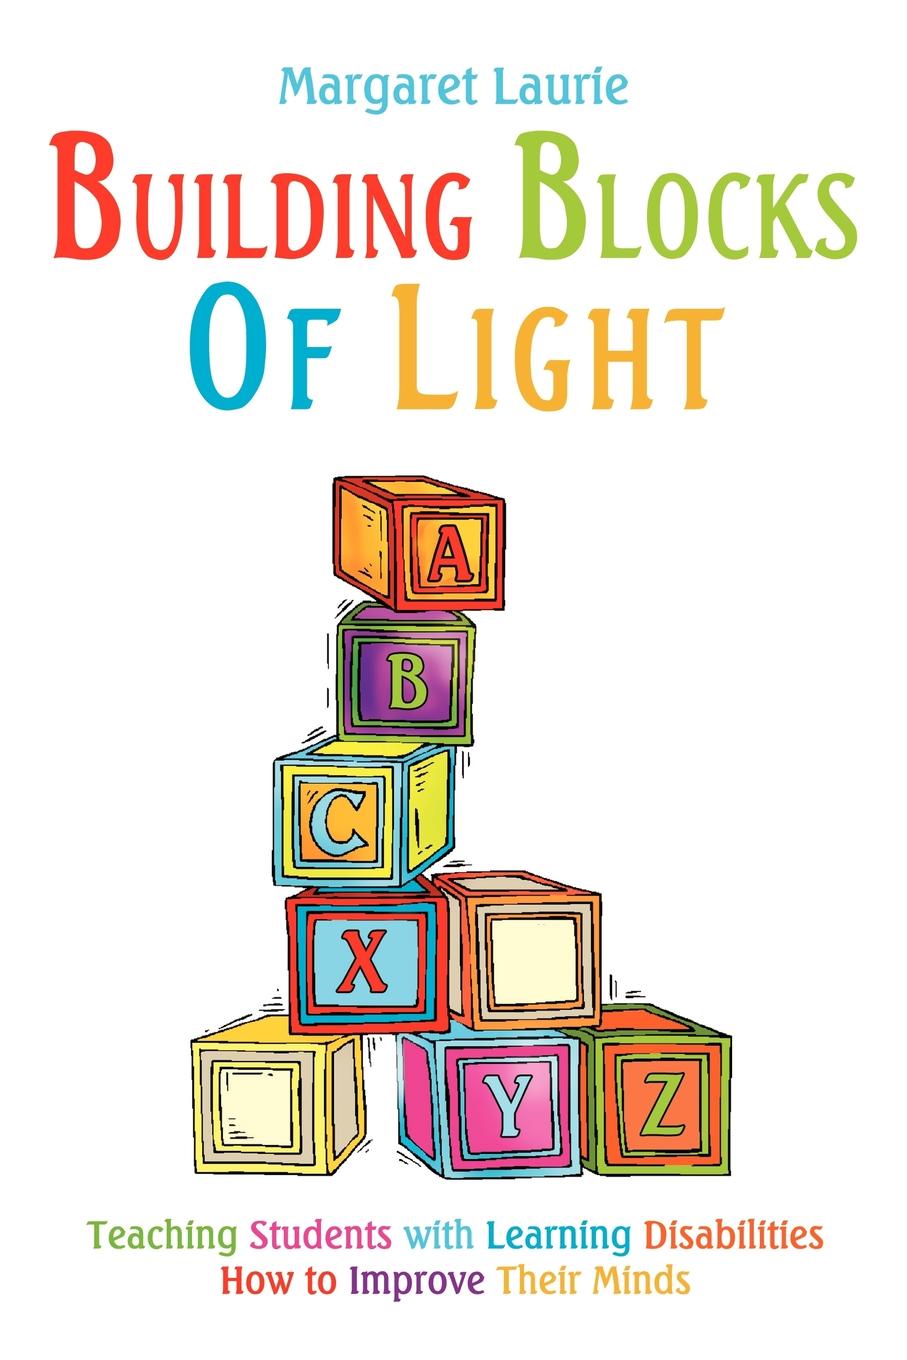 Building Blocks of Light. Teaching Students with Learning Disabilities How to Improve Their Minds